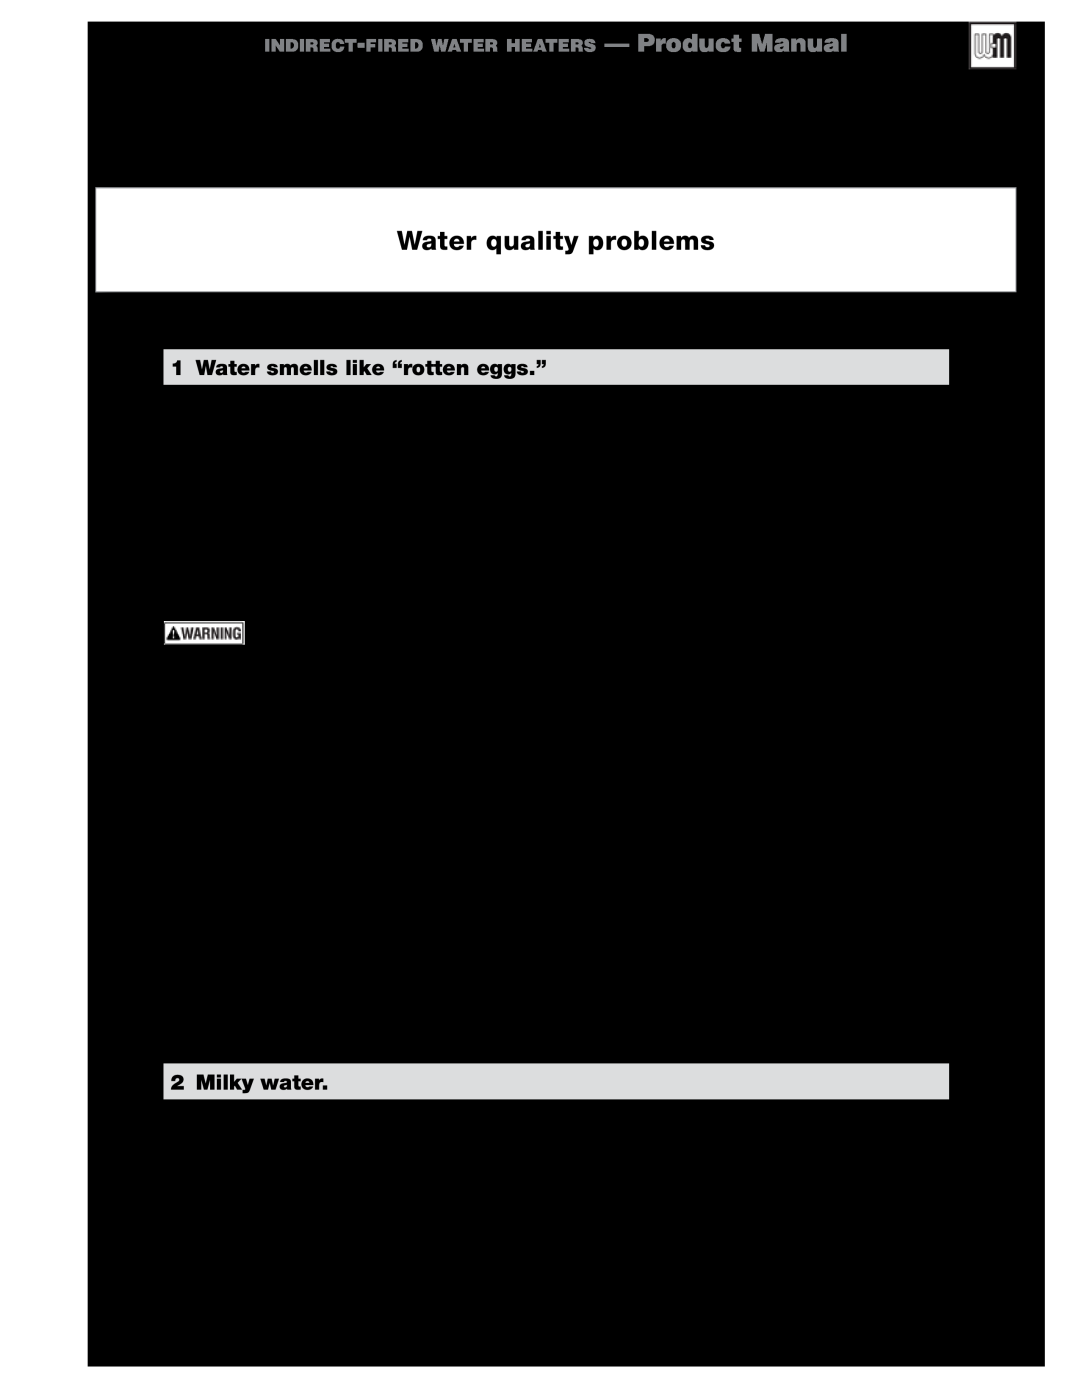 Weil-McLain GL-E223-ADOC 0311 manual Water quality problems, 1Water smells like “rotten eggs.”, 2Milky water 